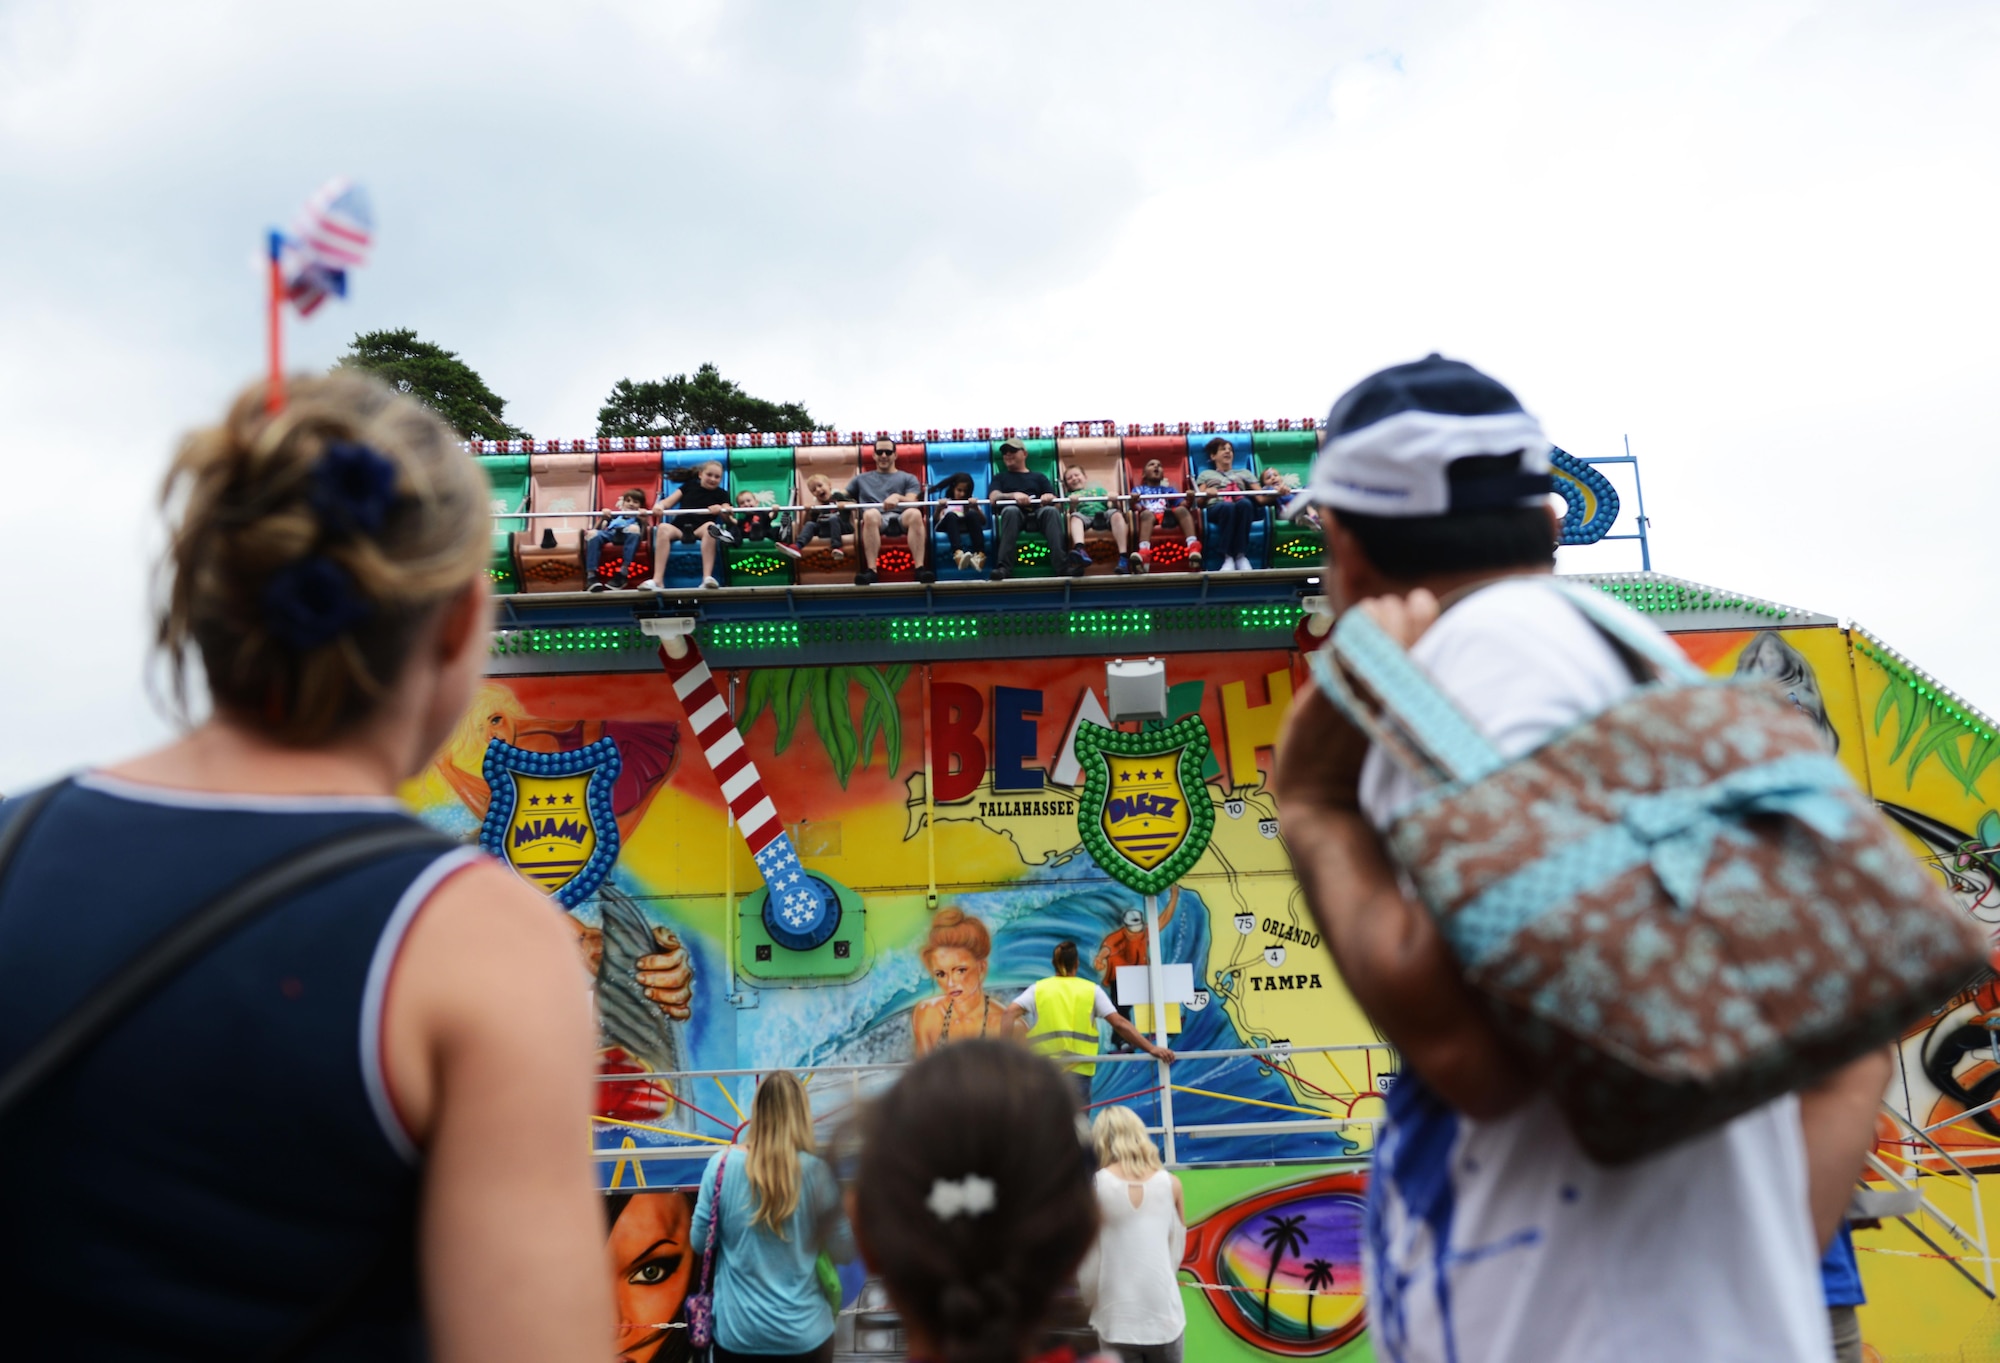 A family watches carnival goers enjoy a ride during the Freedom Fest 2016 at Ramstein Air Base, Germany, July 4, 2016. The Independence Day celebration included a variety of foods, games, rides and fireworks for Kaiserslautern Military Community members. (U.S. Air Force Photo/ Airman 1st Class Joshua Magbanua)